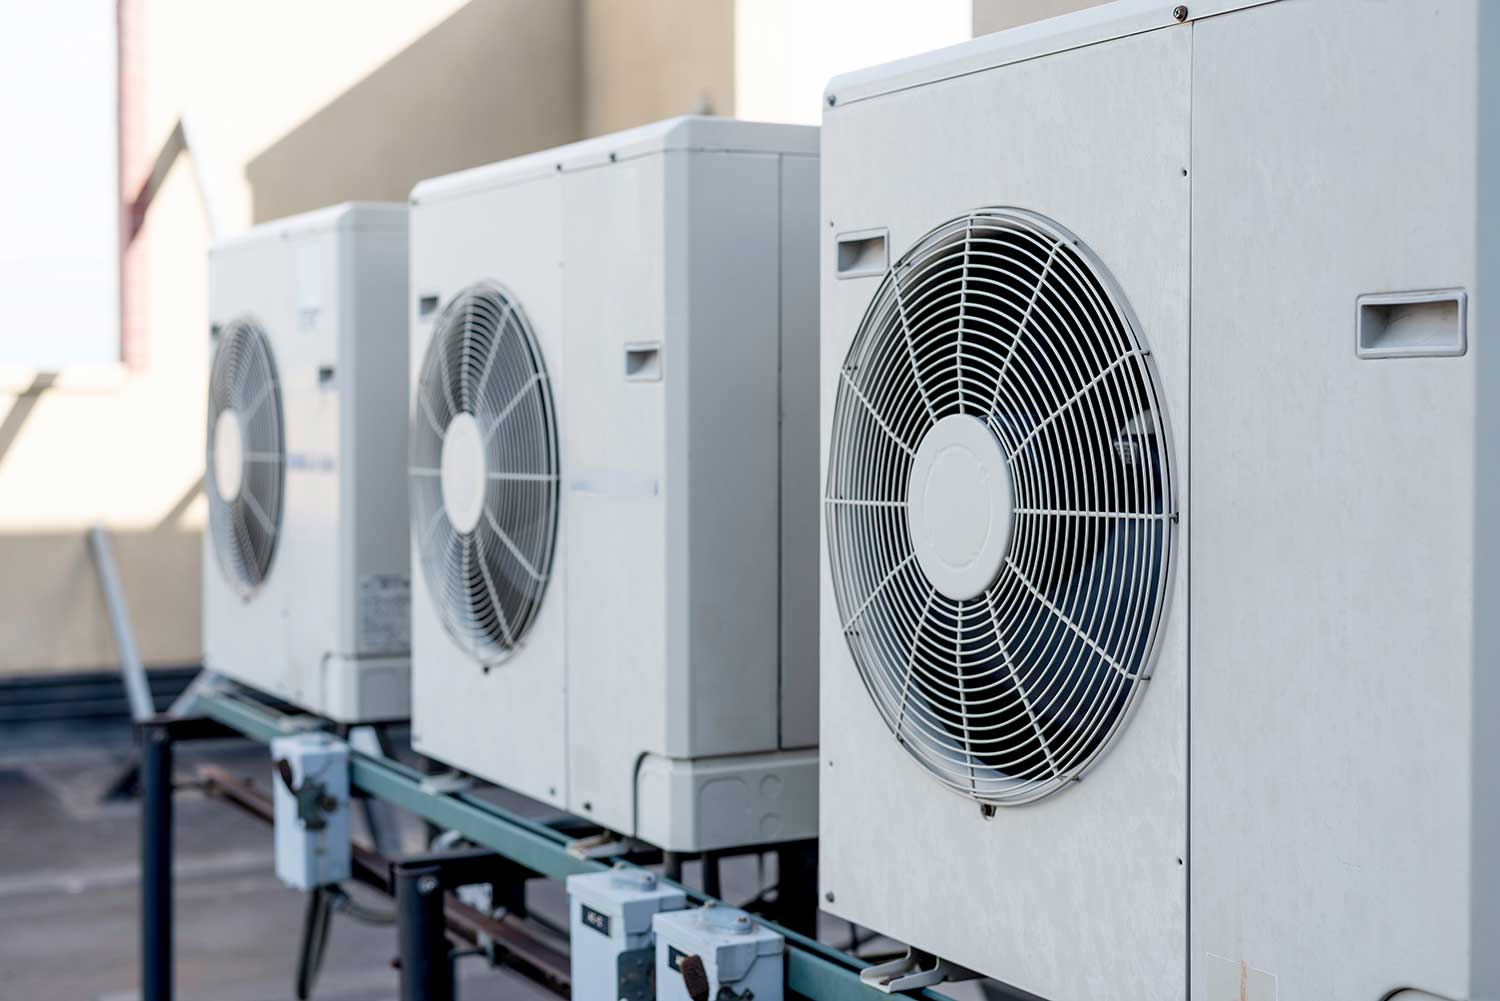 Making sure you have a fantastic agreement with your Heating and A/C provider